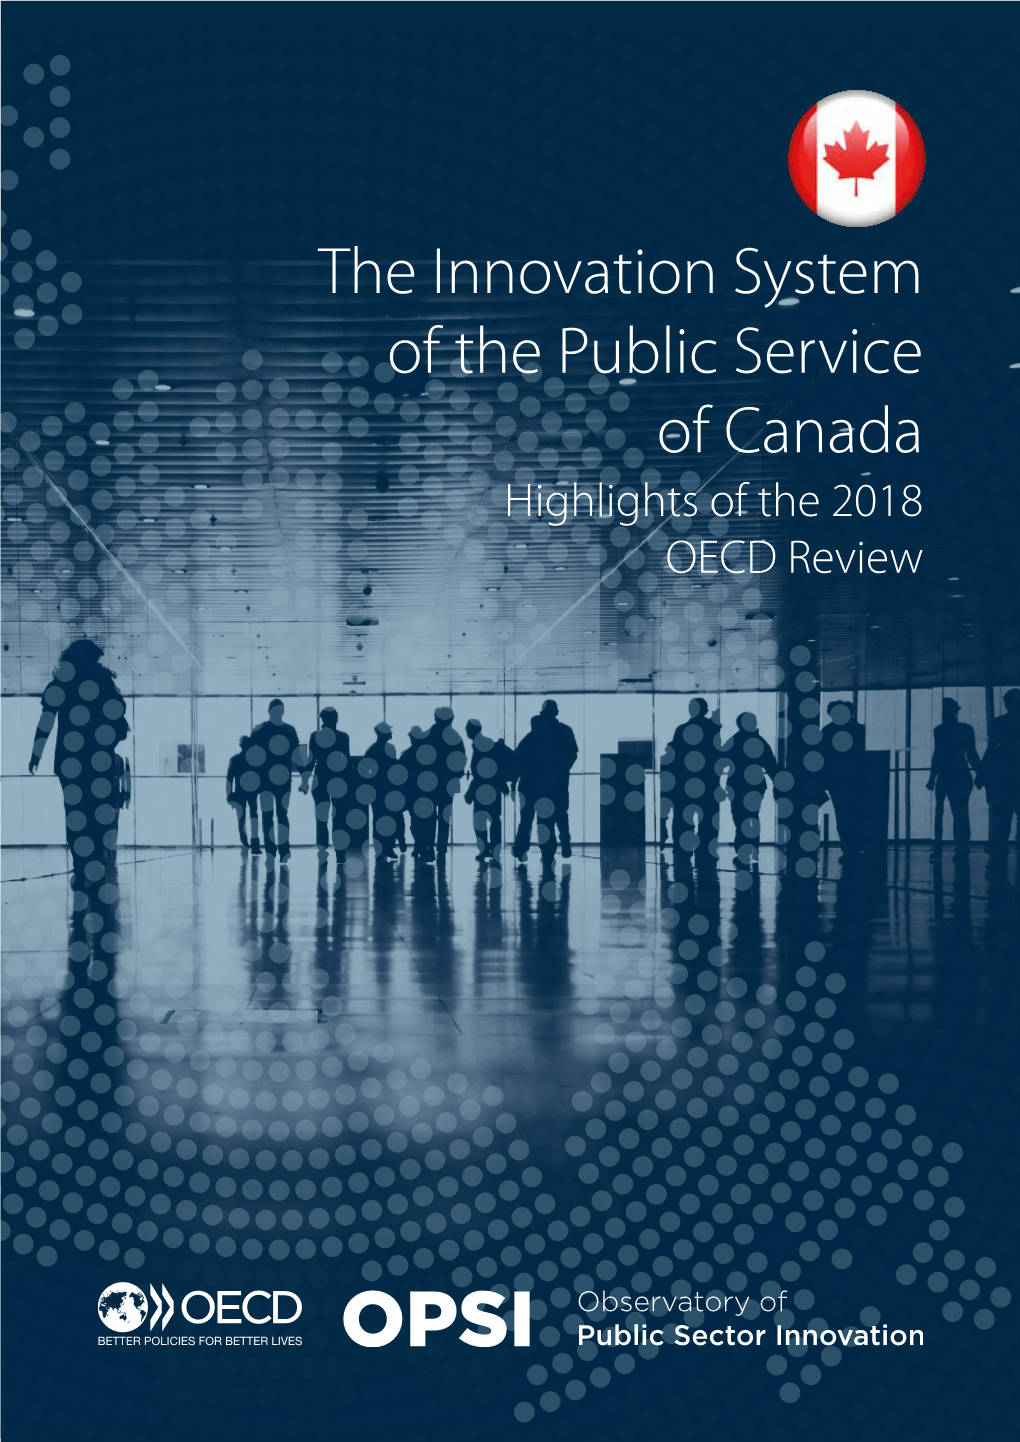 The Innovation System of the Public Service of Canada Highlights of the 2018 OECD Review